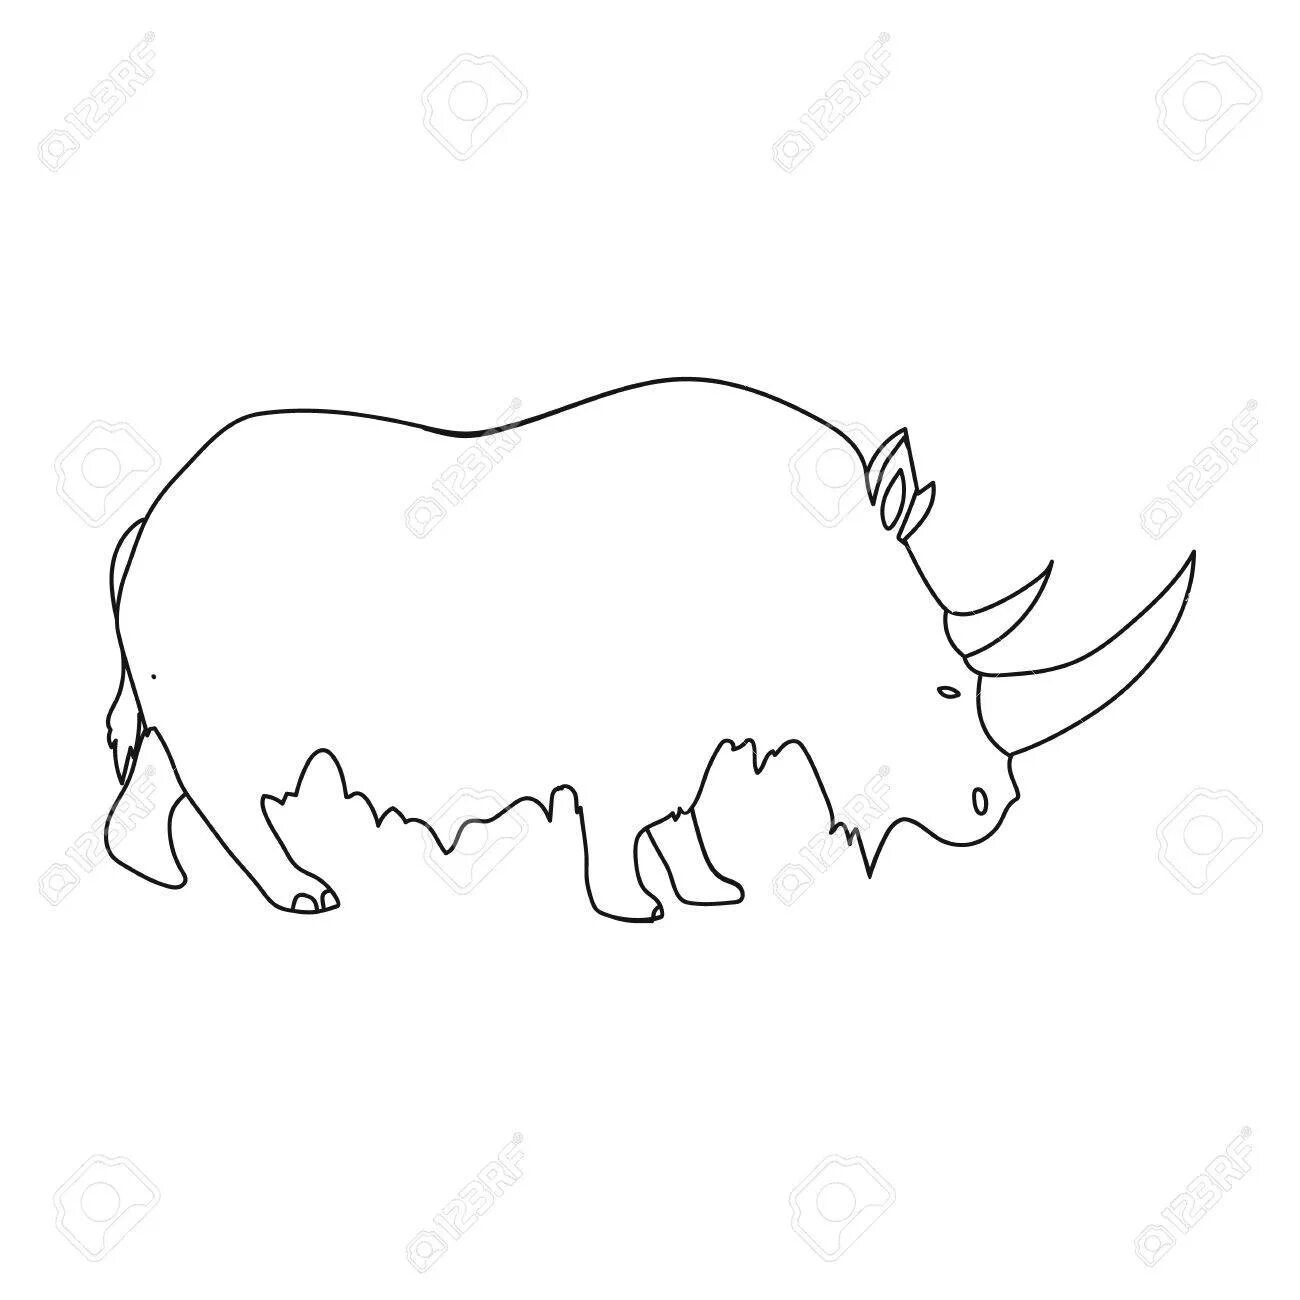 Amazing coloring of a woolly rhinoceros